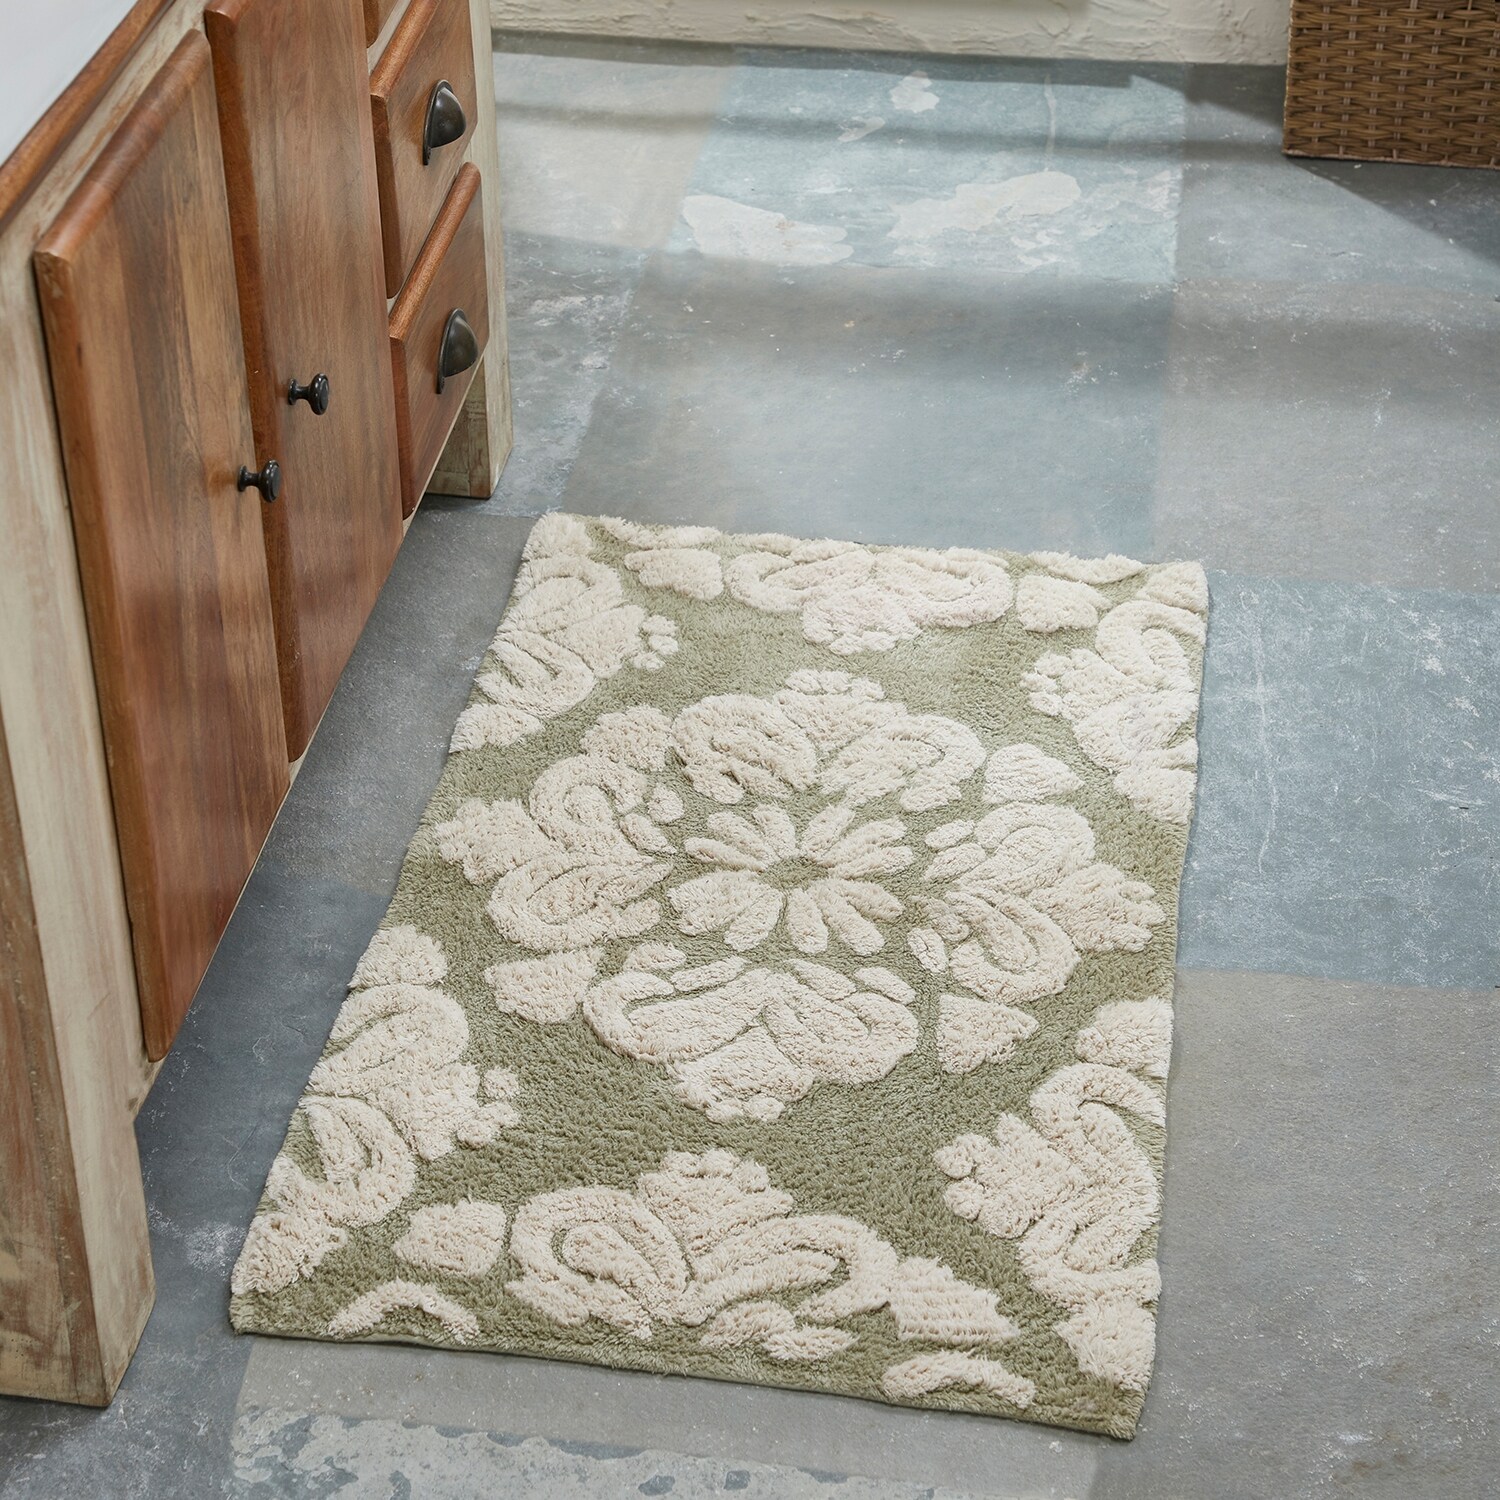 Luxury Bath Rugs  Medallion Style Tufted Bath Rugs at Better Trends